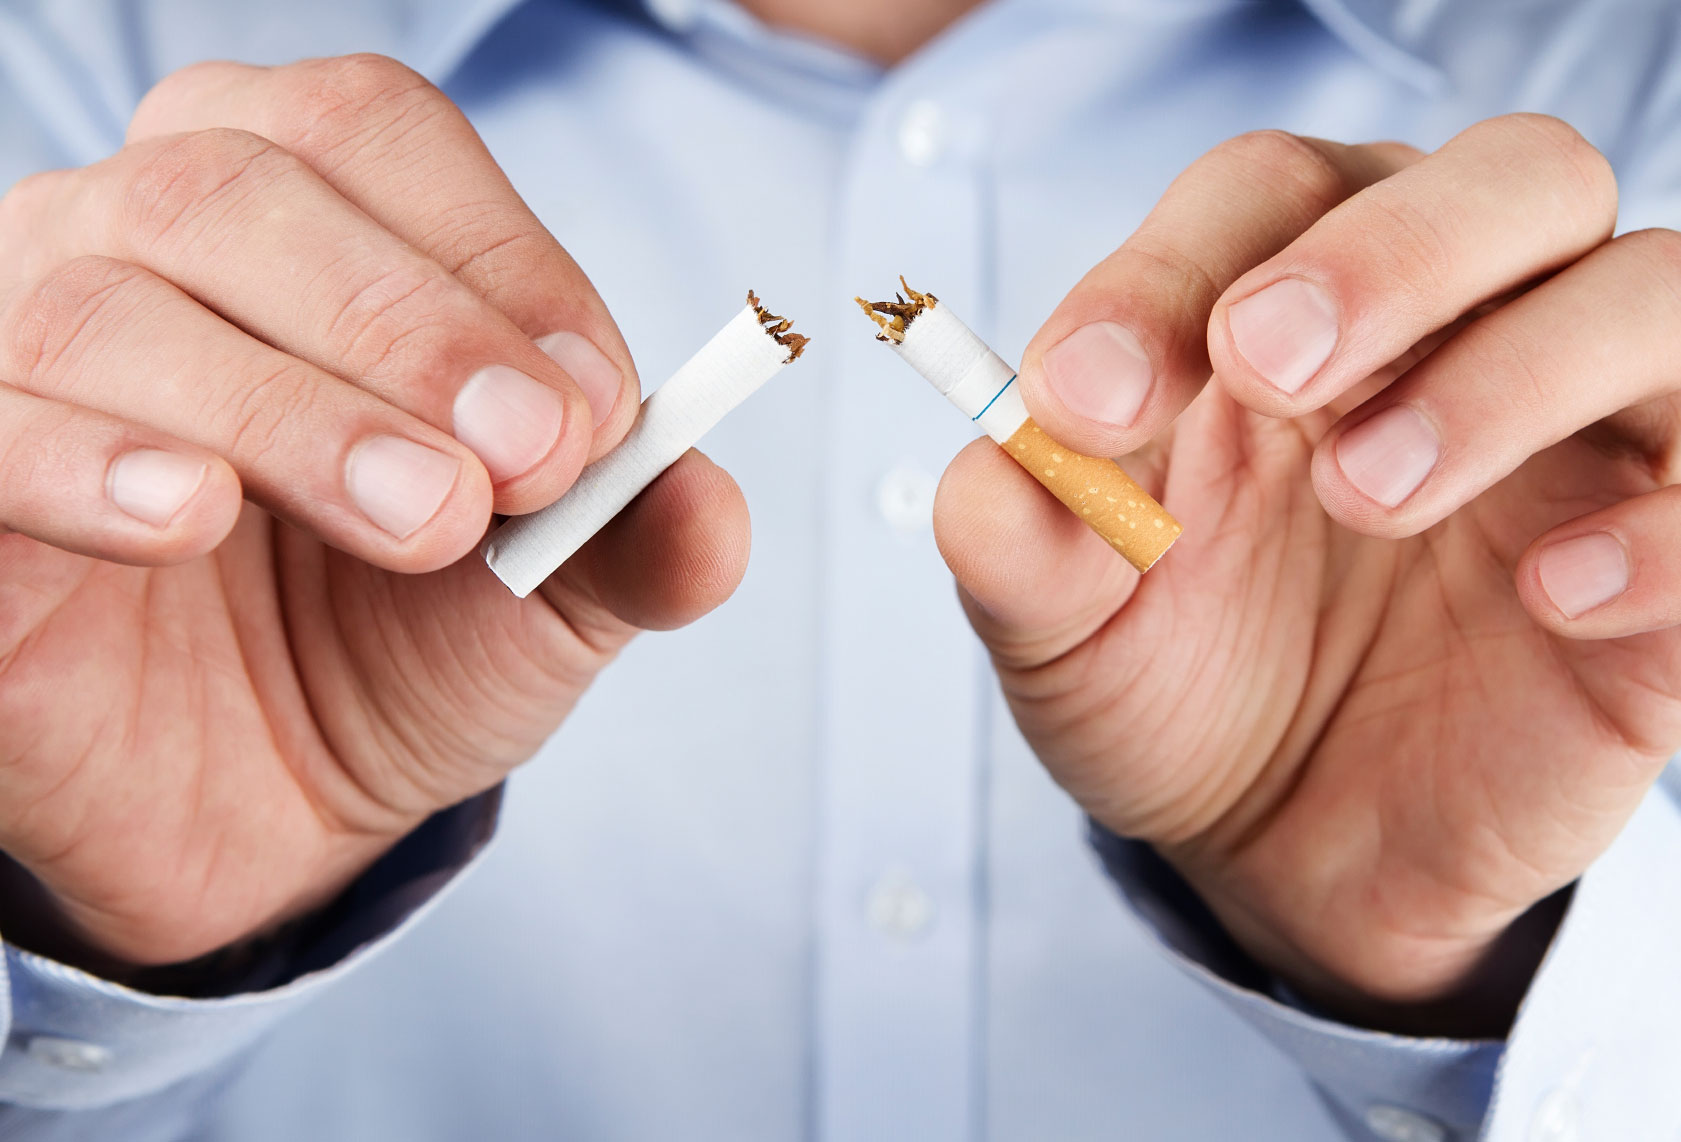 Health Benefits of Quitting Smoking Over Time